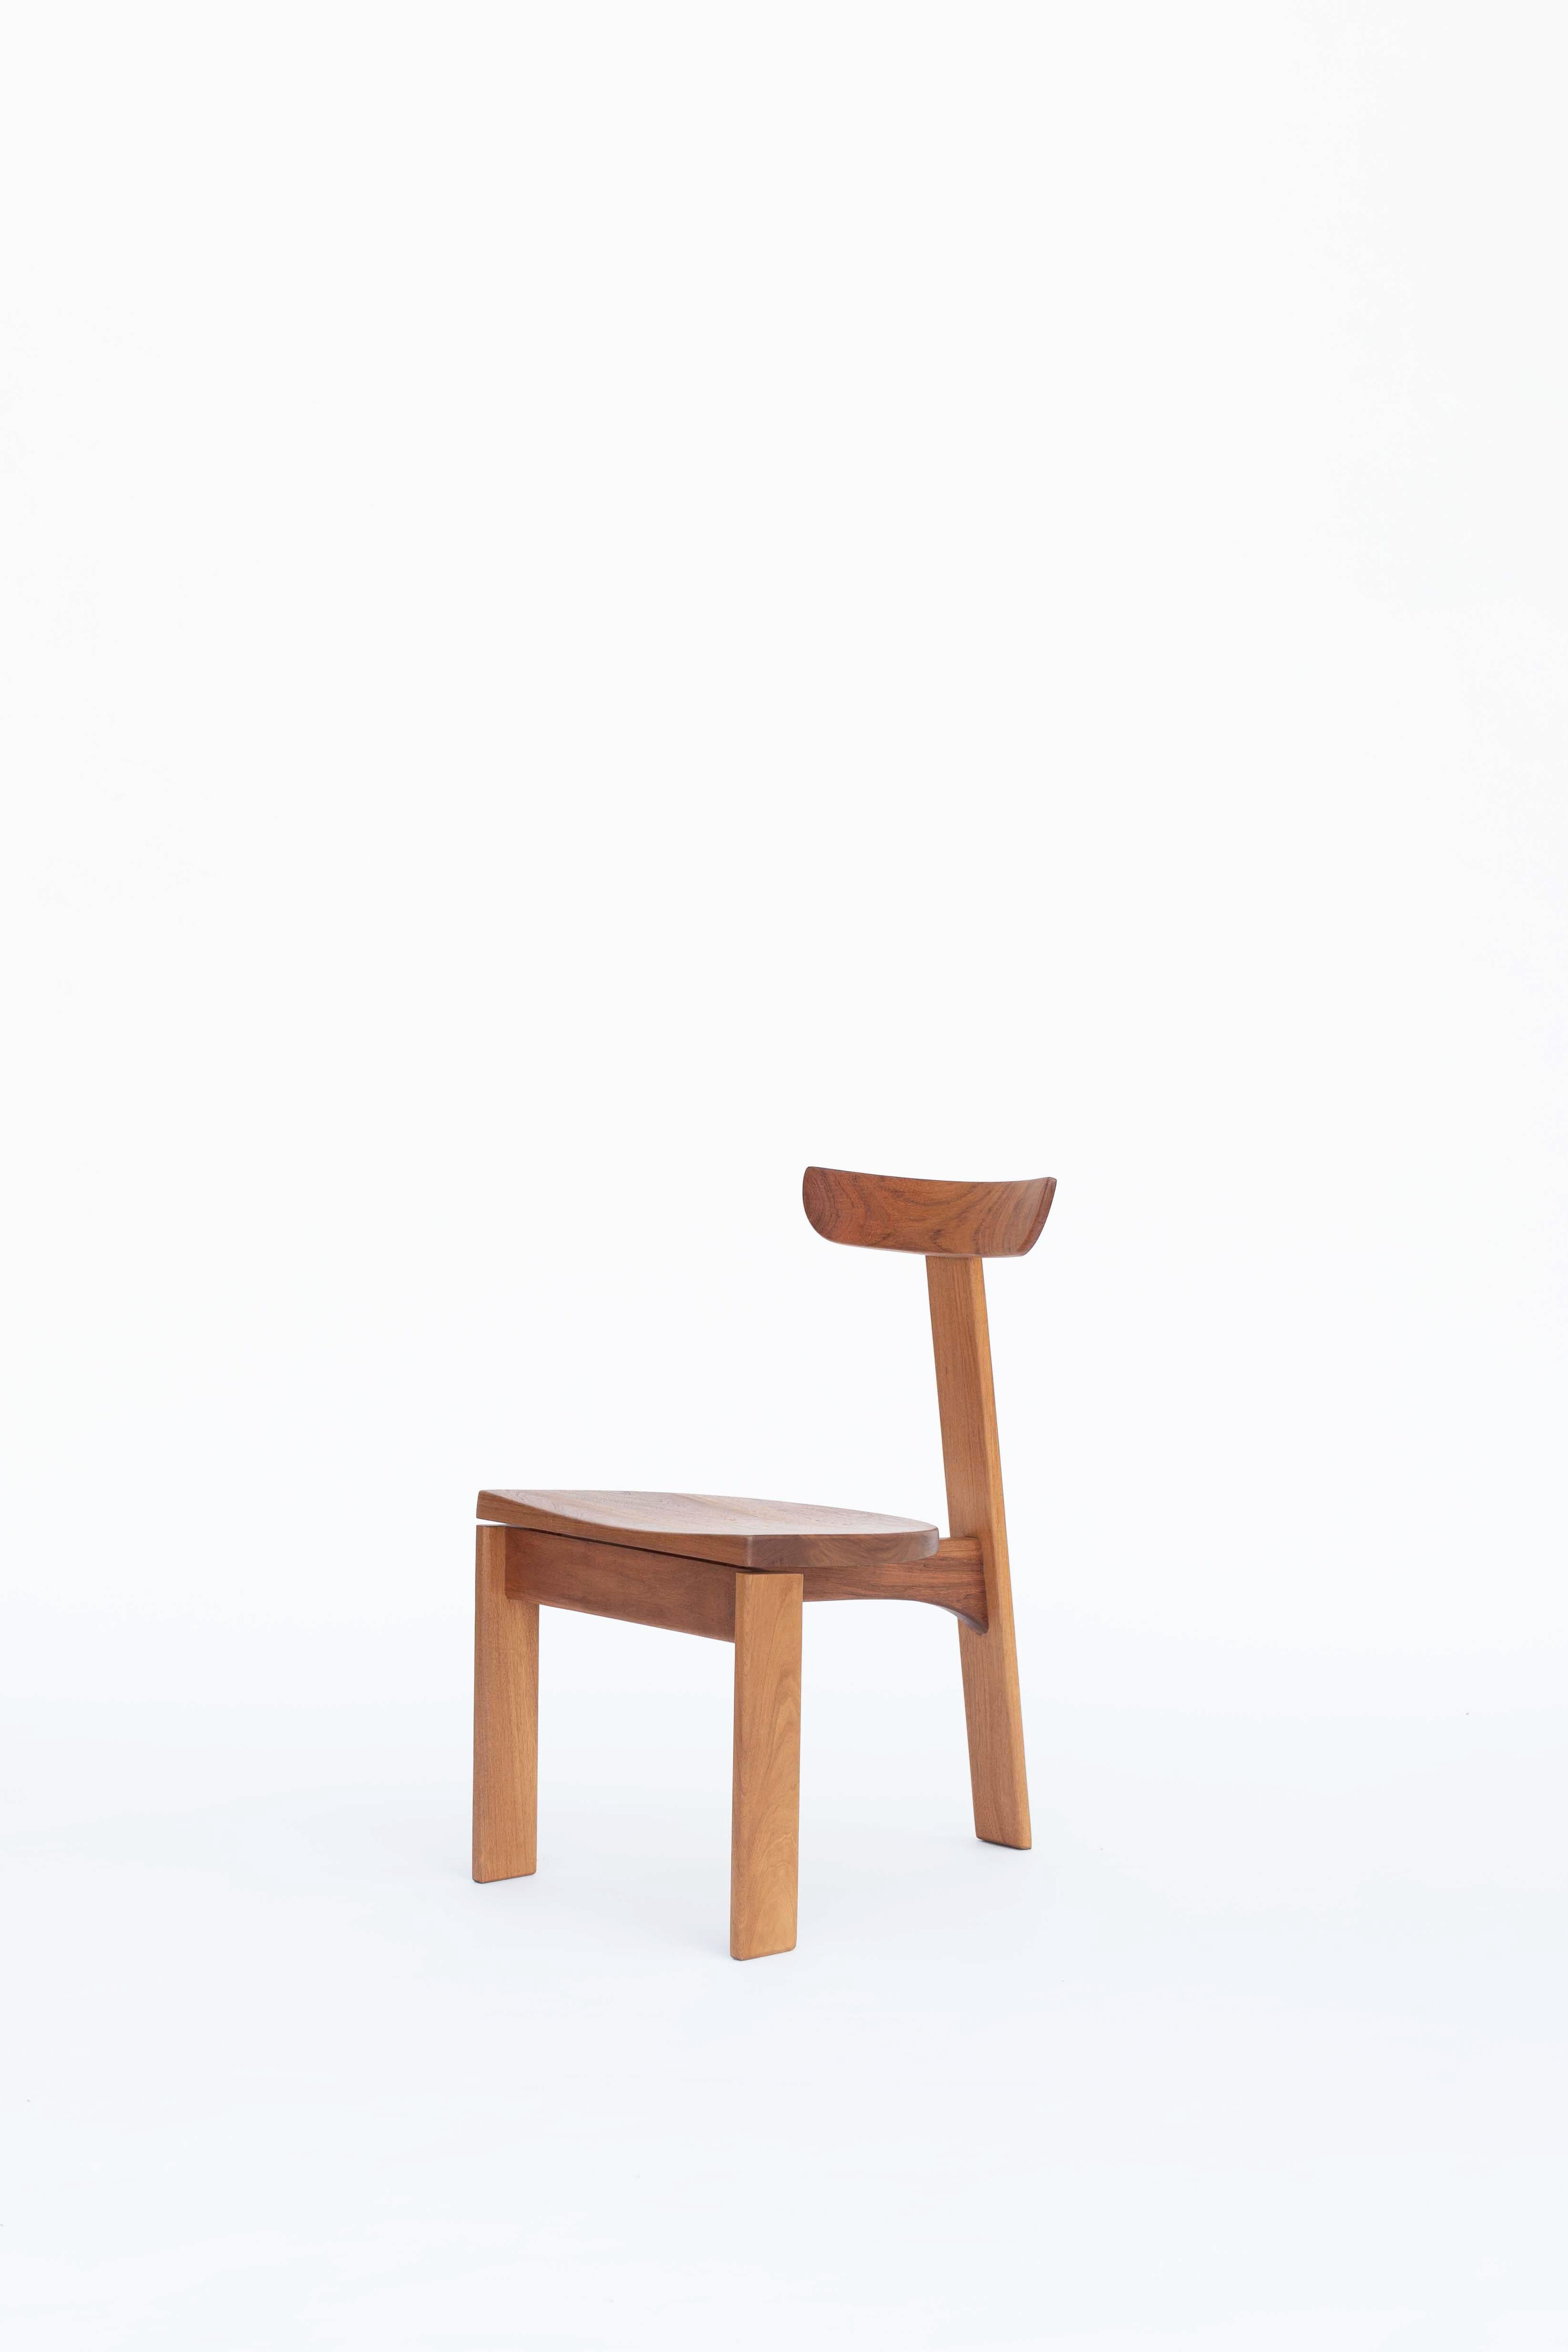 Mexican Contemporary Dining Chair in Natural Solid Wood by Ania Wolowska For Sale